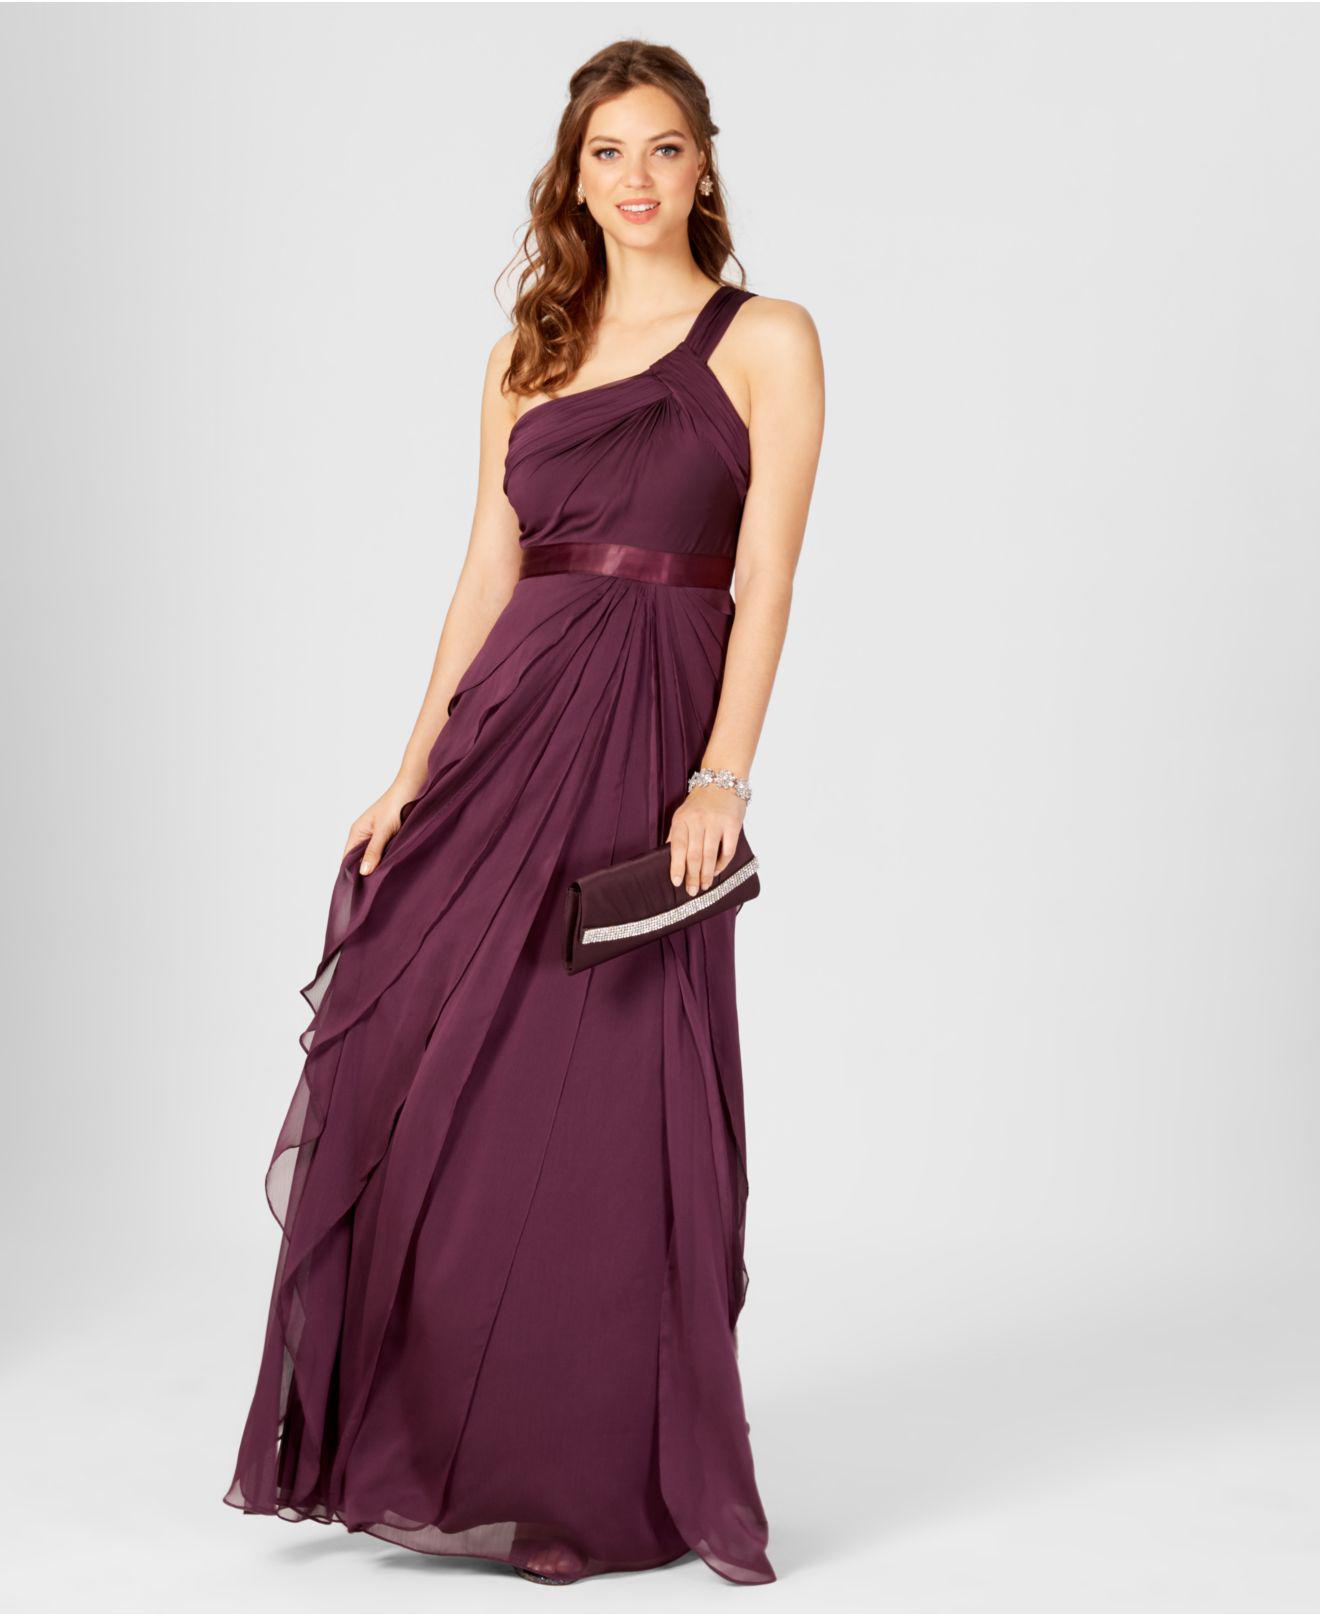 Adrianna Papell One-shoulder Tiered Chiffon Gown in Purple - Lyst